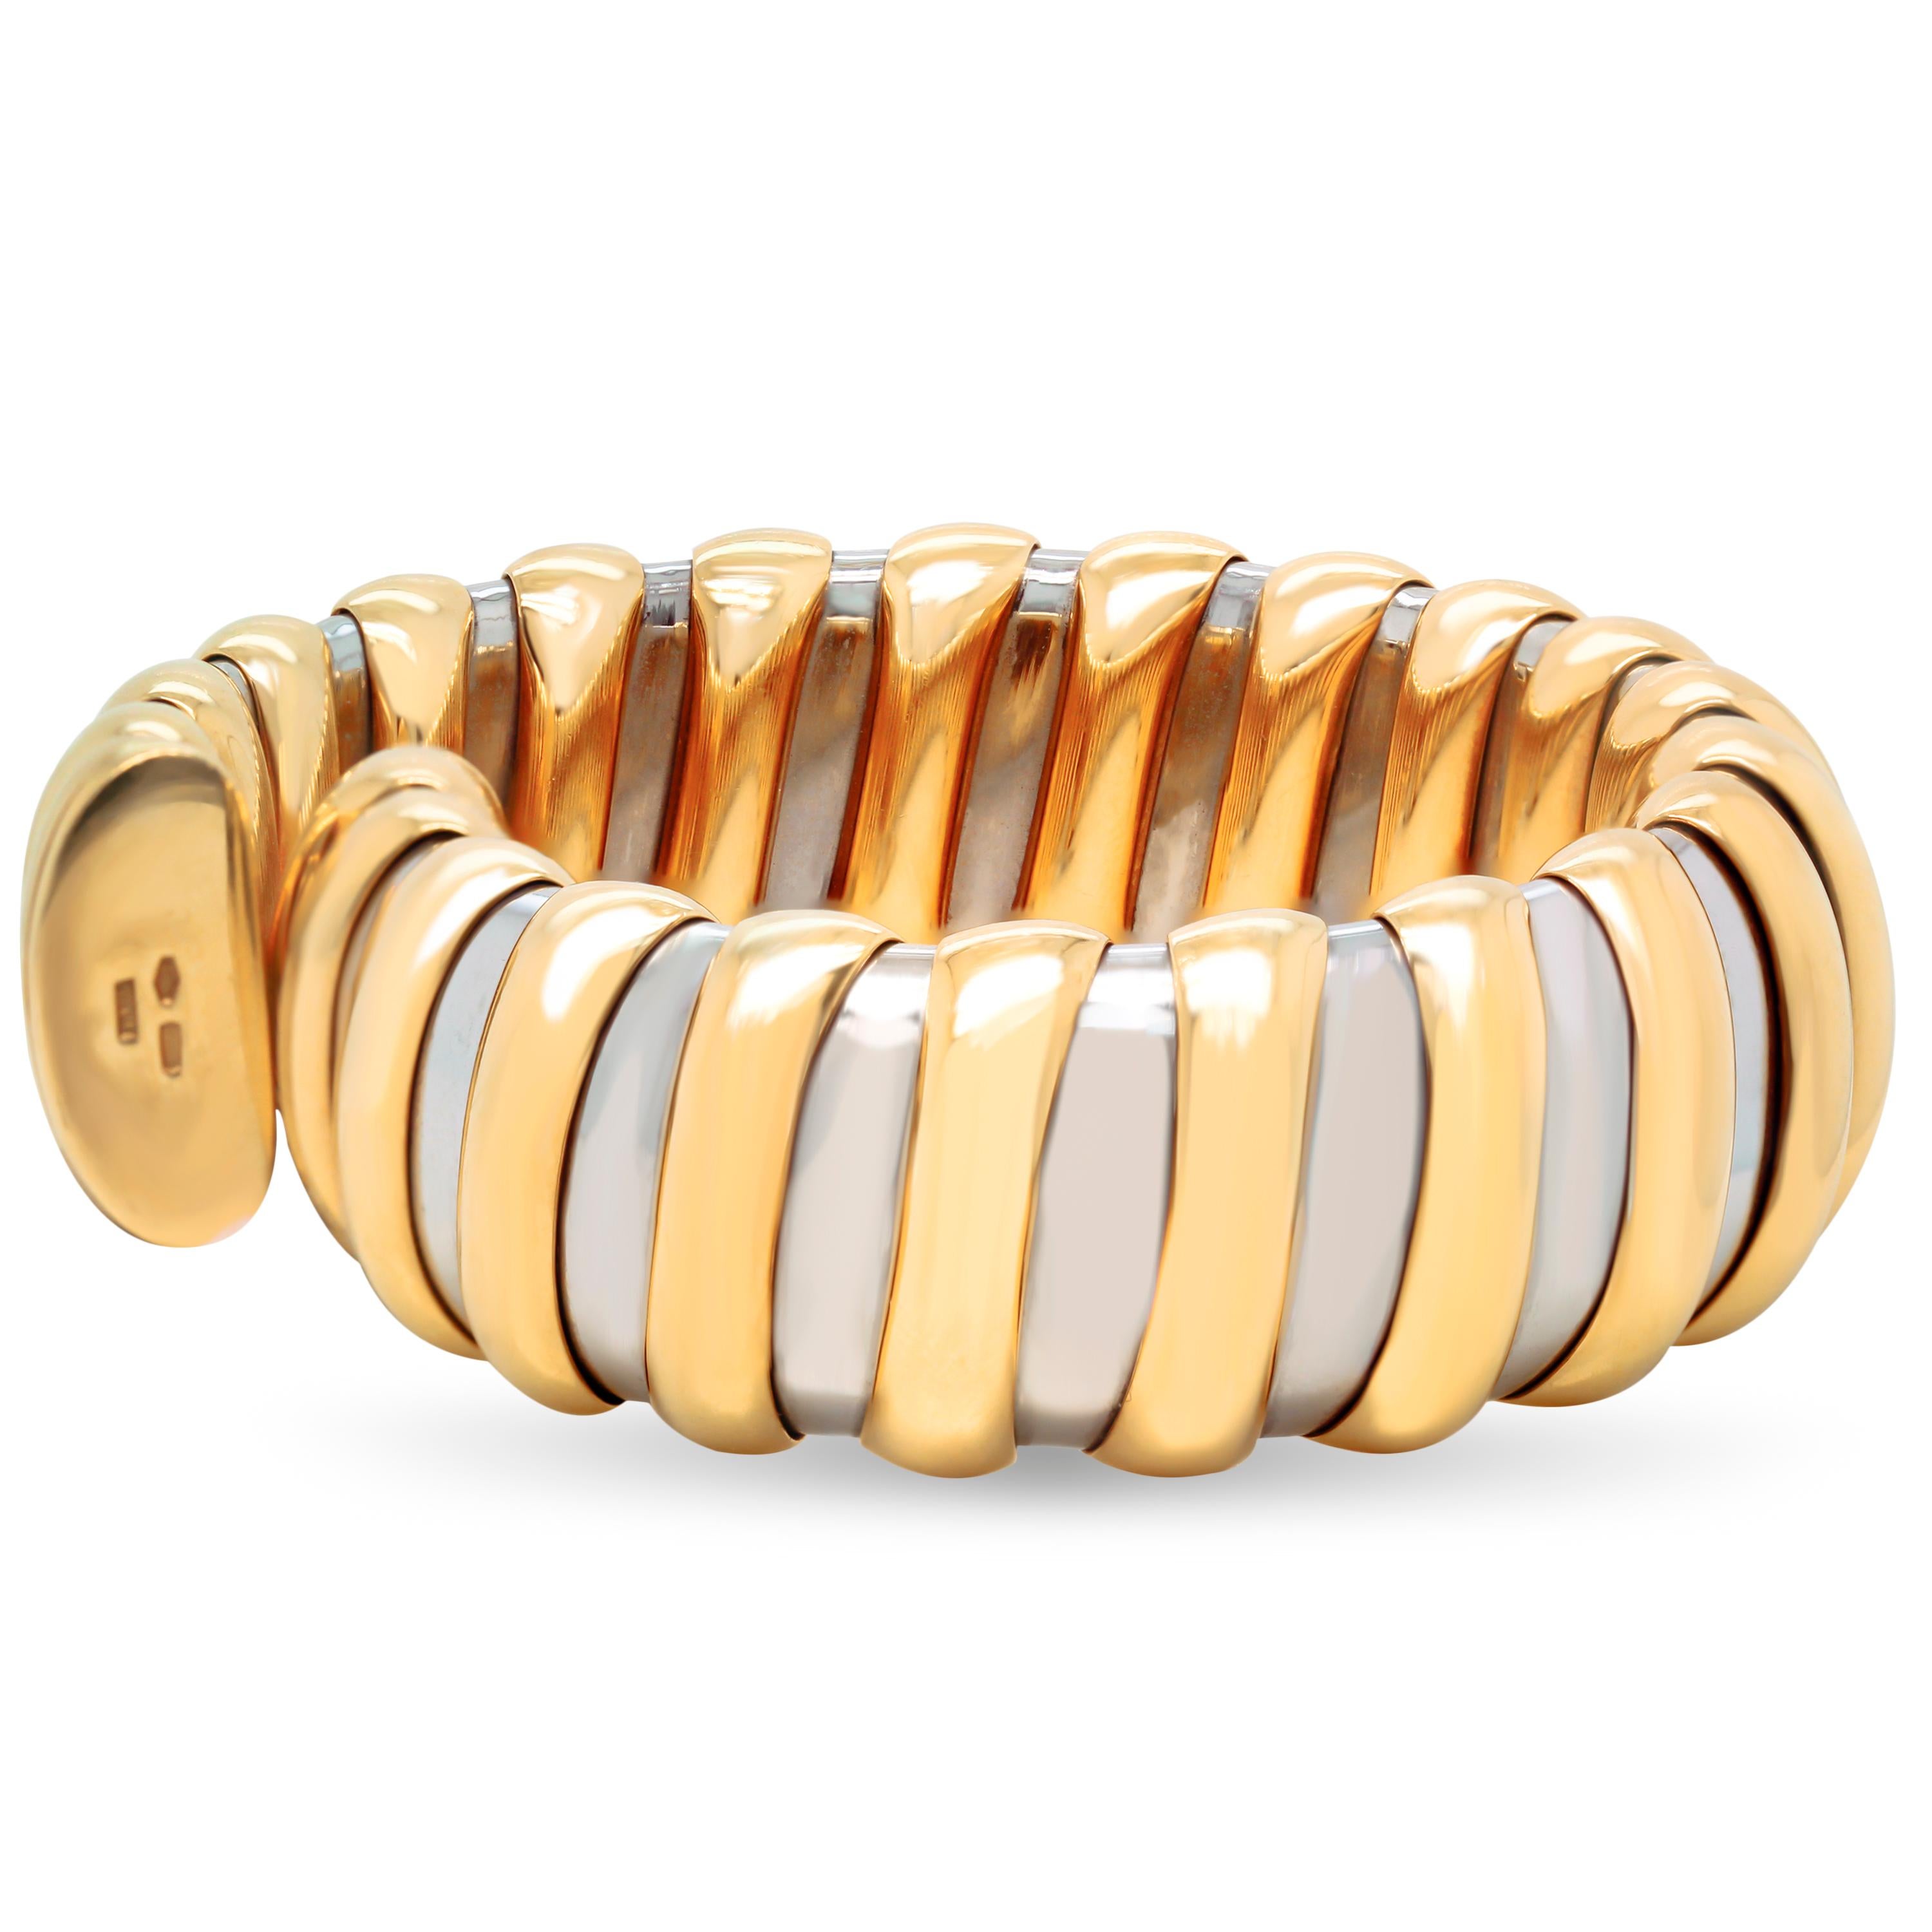 Bulgari Tubogas 18K Yellow Gold Stainless Steel Flexible Bangle Bracelet

This unique bracelet by Bulgari is done entirely in Stainless Steel and 18K Gold. The bangle is quite flexible and stretches open to wear.

Size 7.5. (7.5 inch length). 0.75